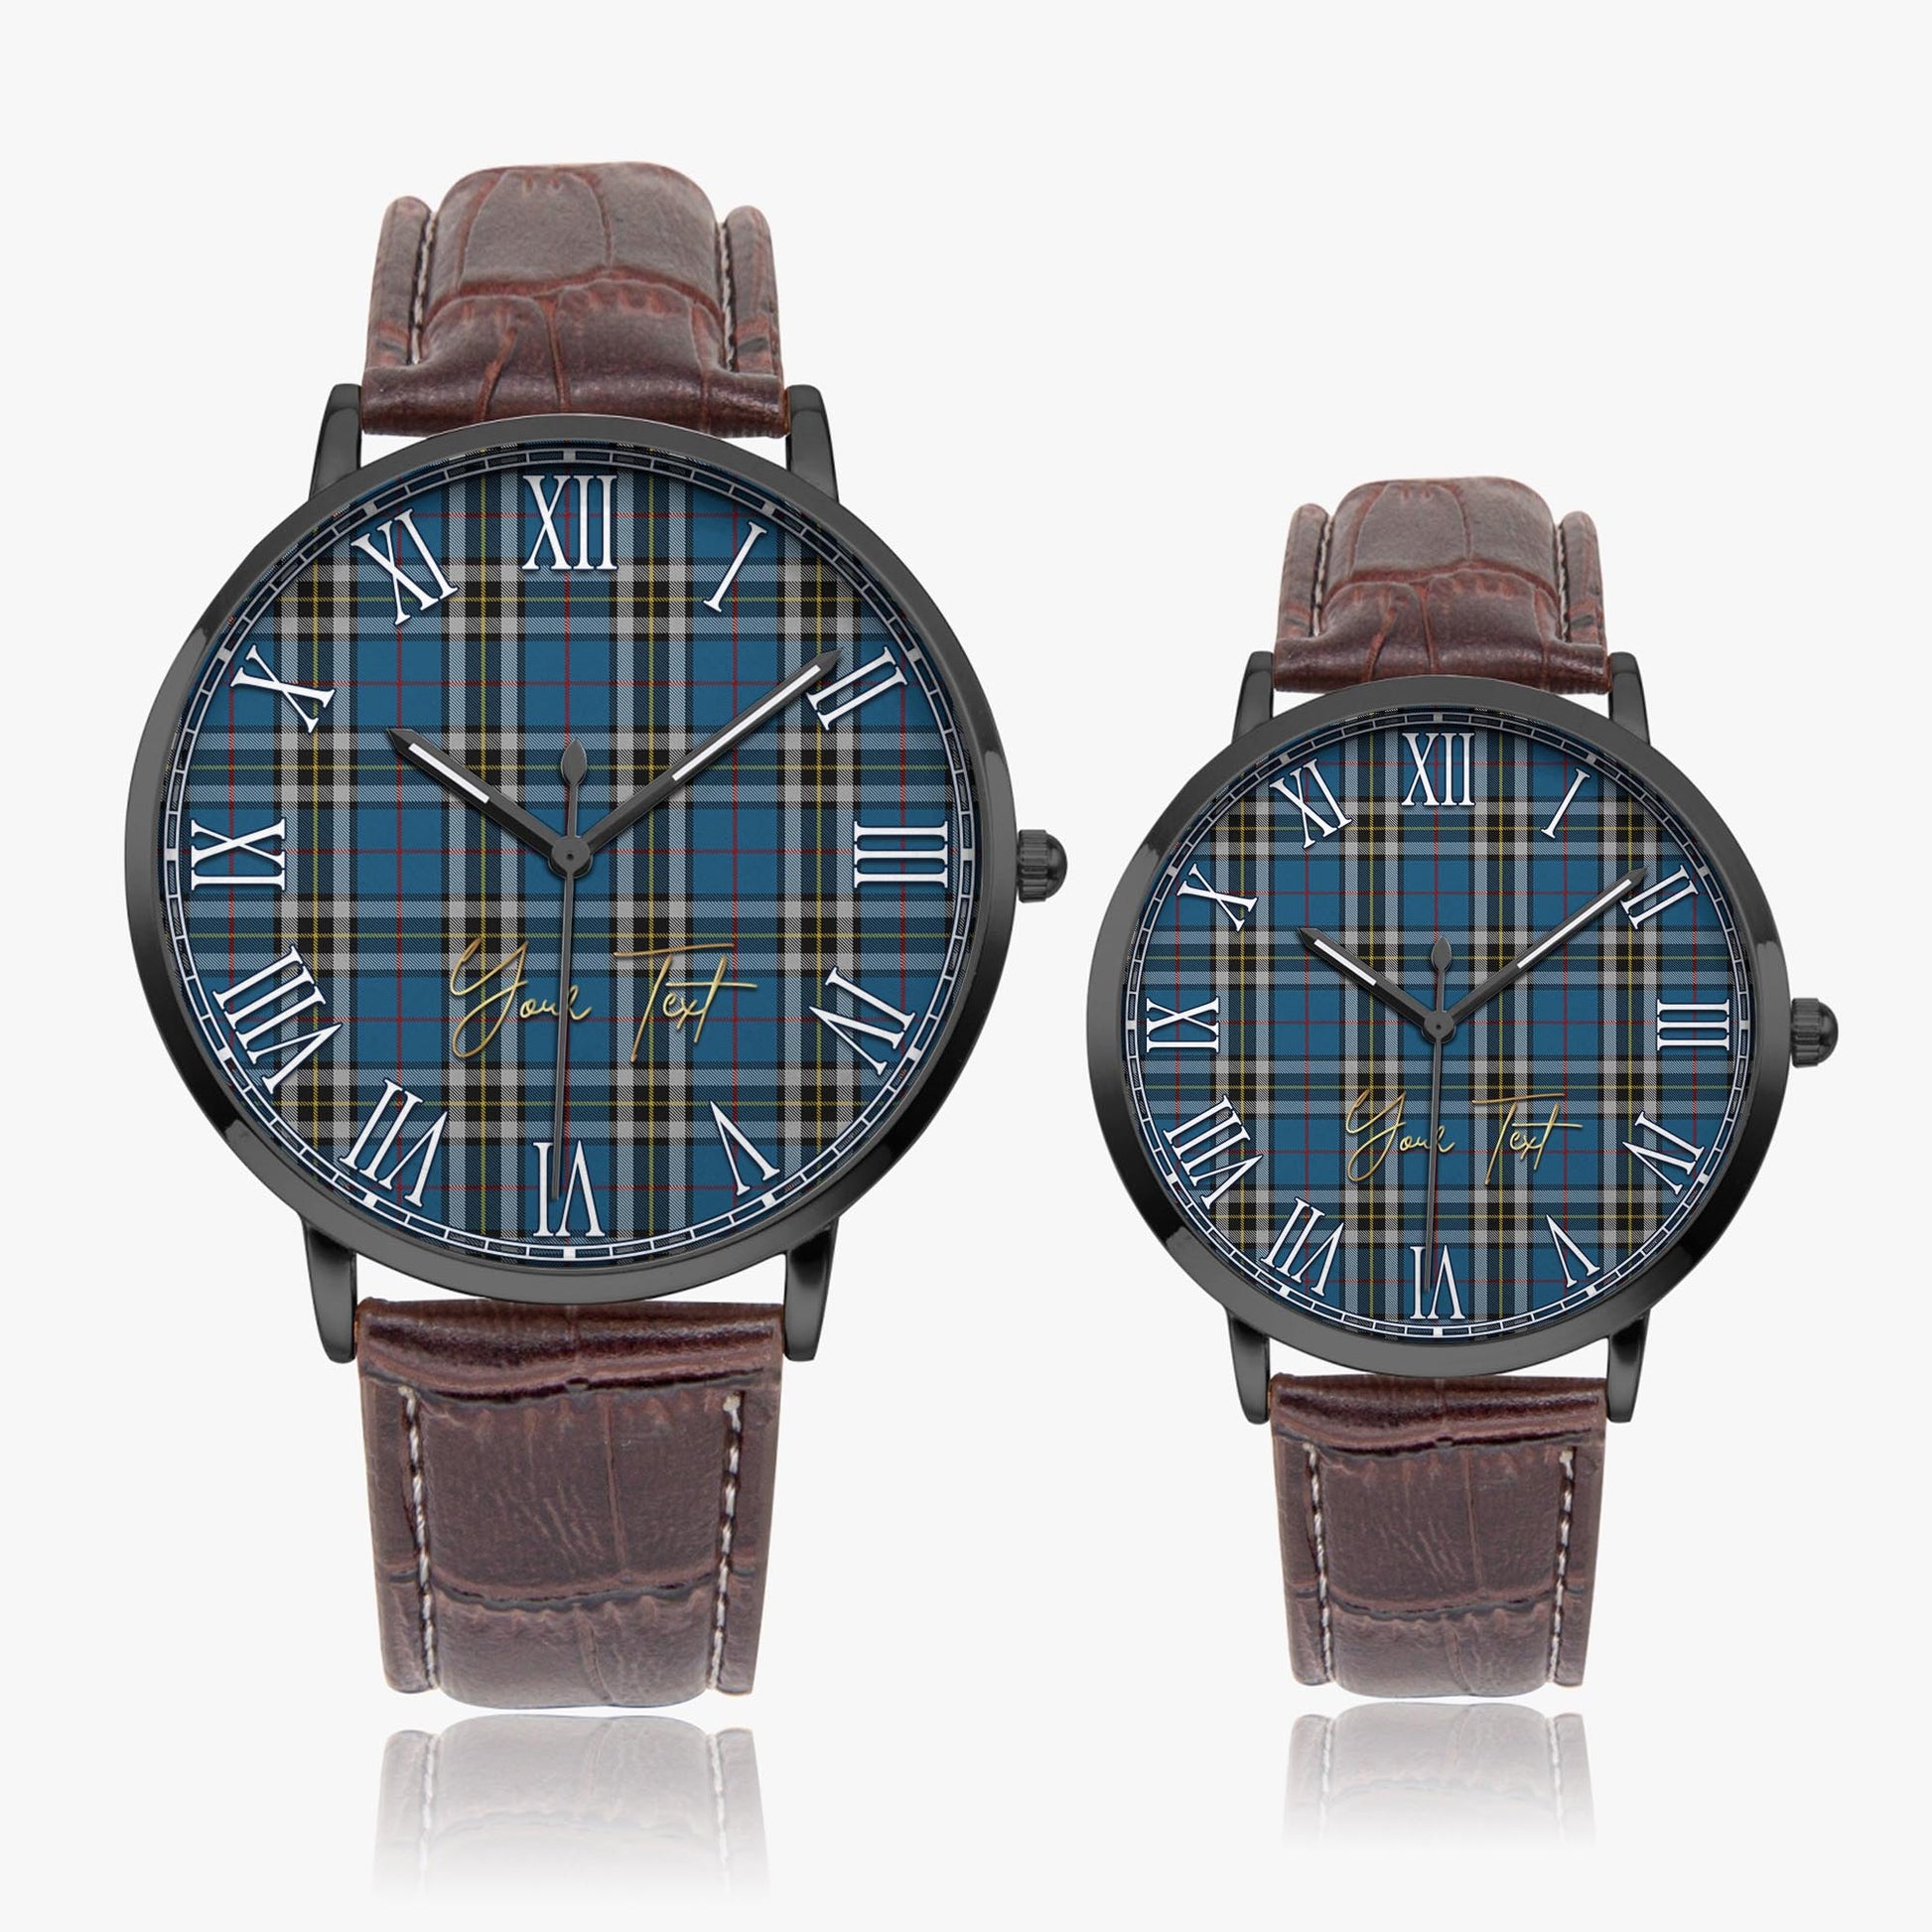 Thomson Dress Blue Tartan Personalized Your Text Leather Trap Quartz Watch Ultra Thin Black Case With Brown Leather Strap - Tartanvibesclothing Shop